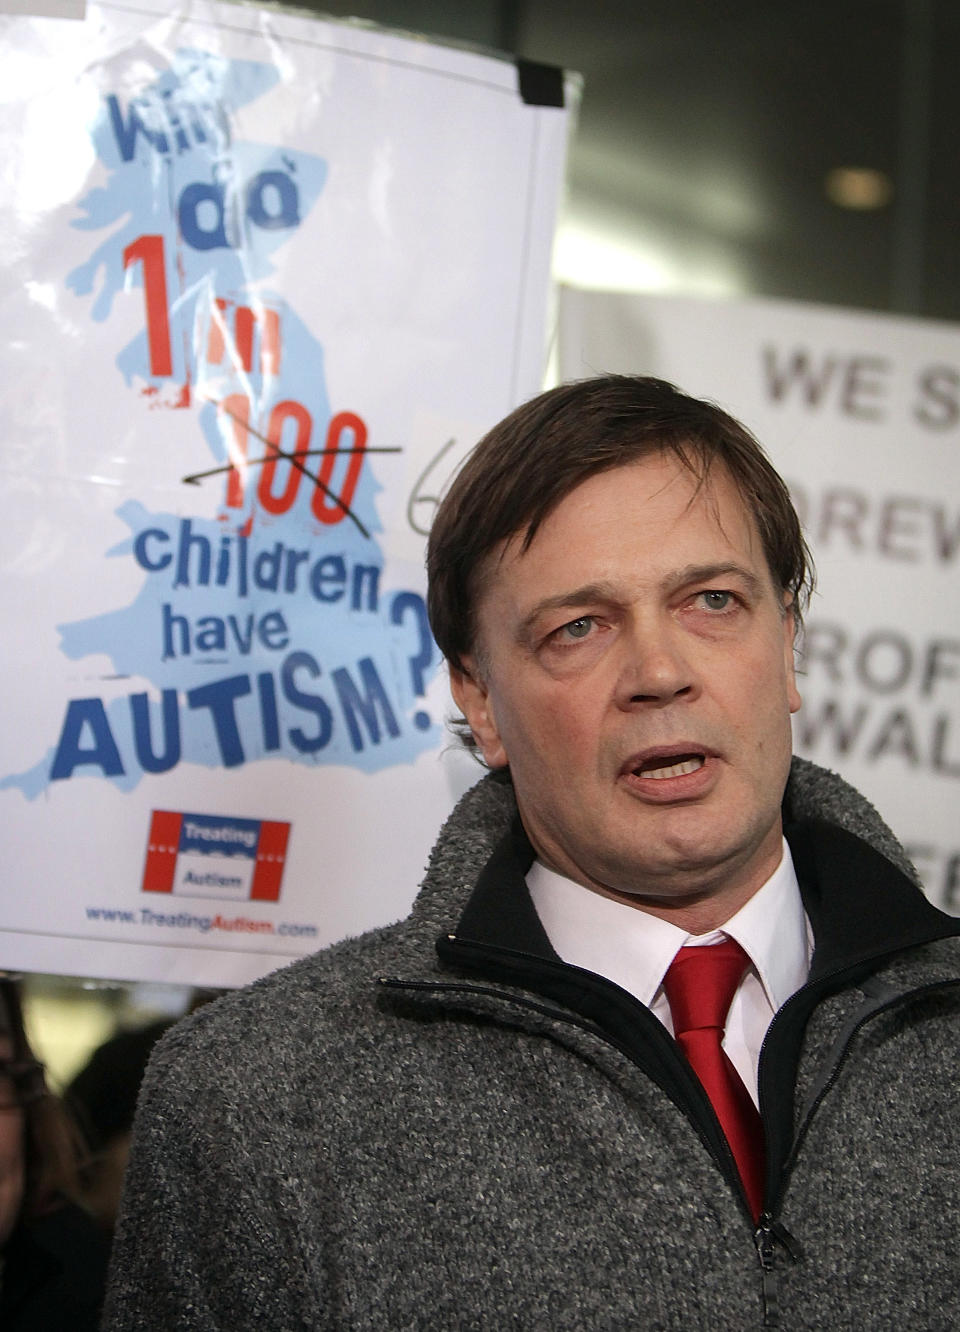 Andrew Wakefield talks to reporters at the General Medical Council in London in 2010. (Photo: Getty)